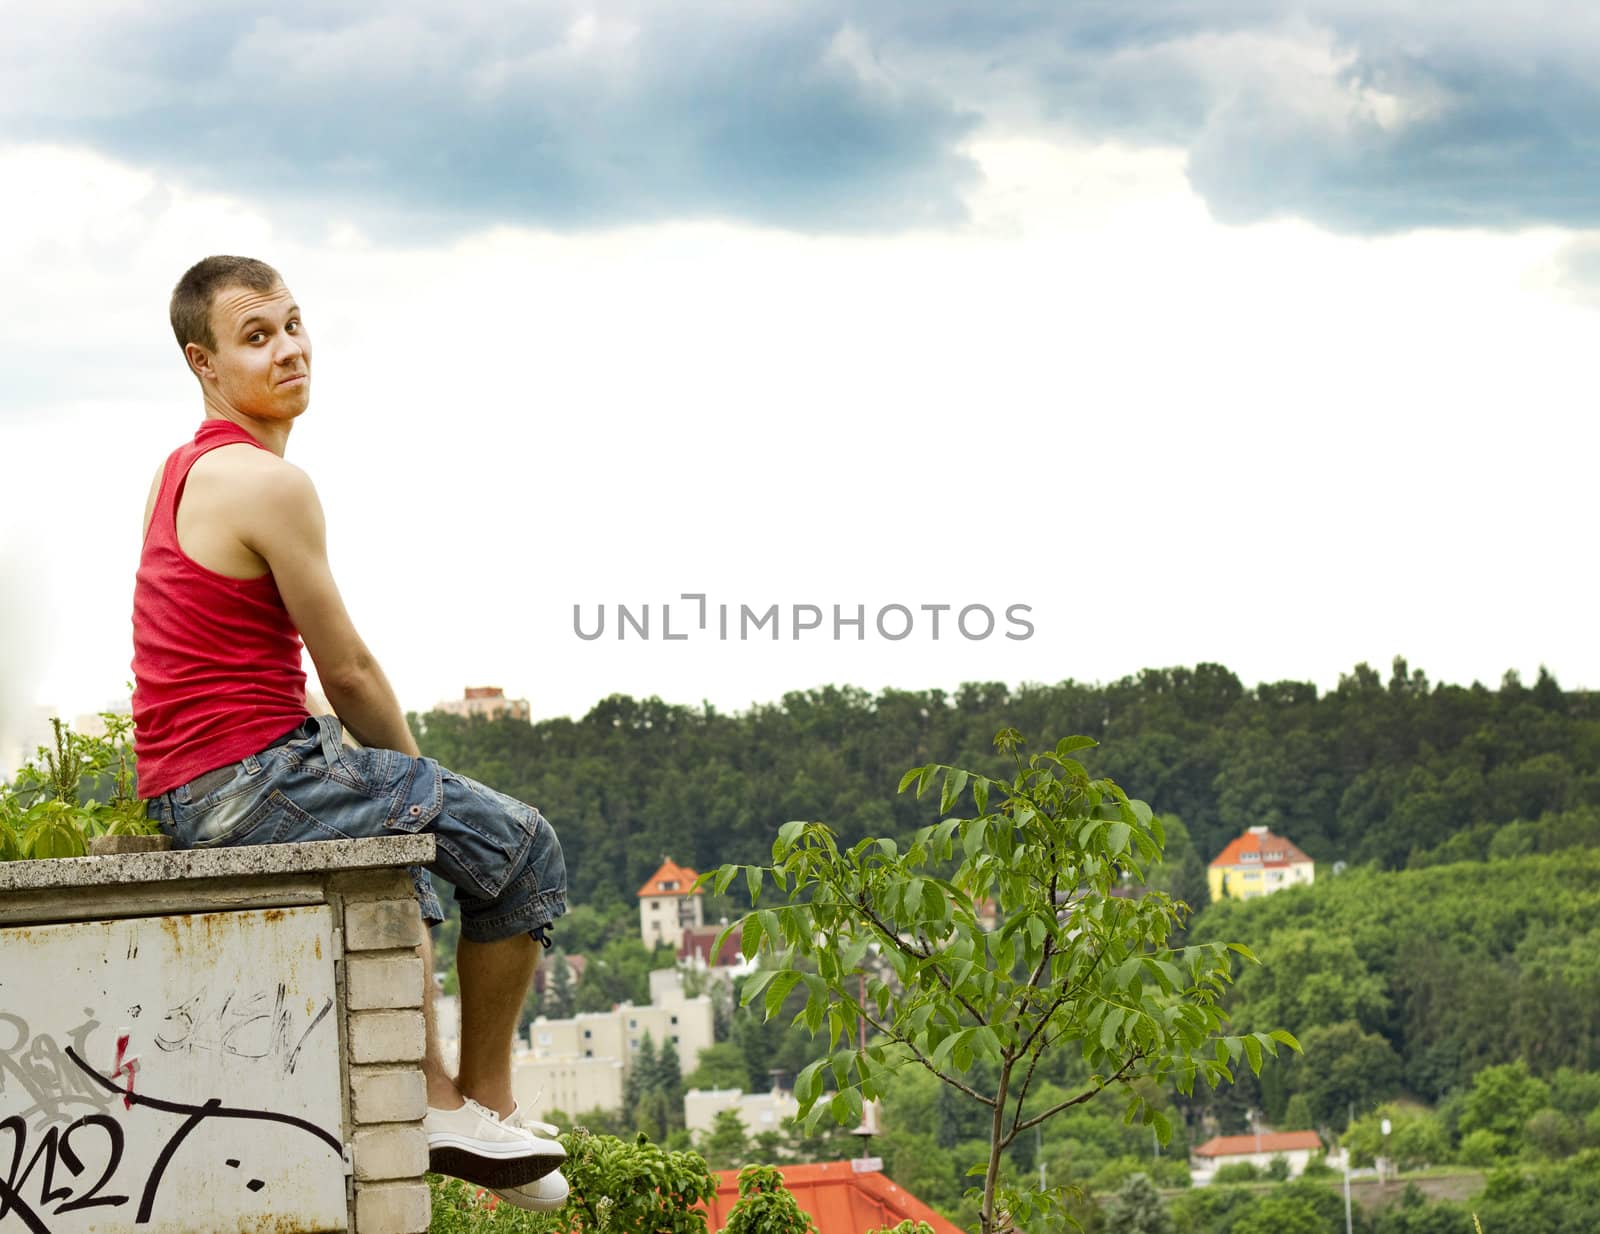 A guy sitting on a fence against panorama of foliage and roofs